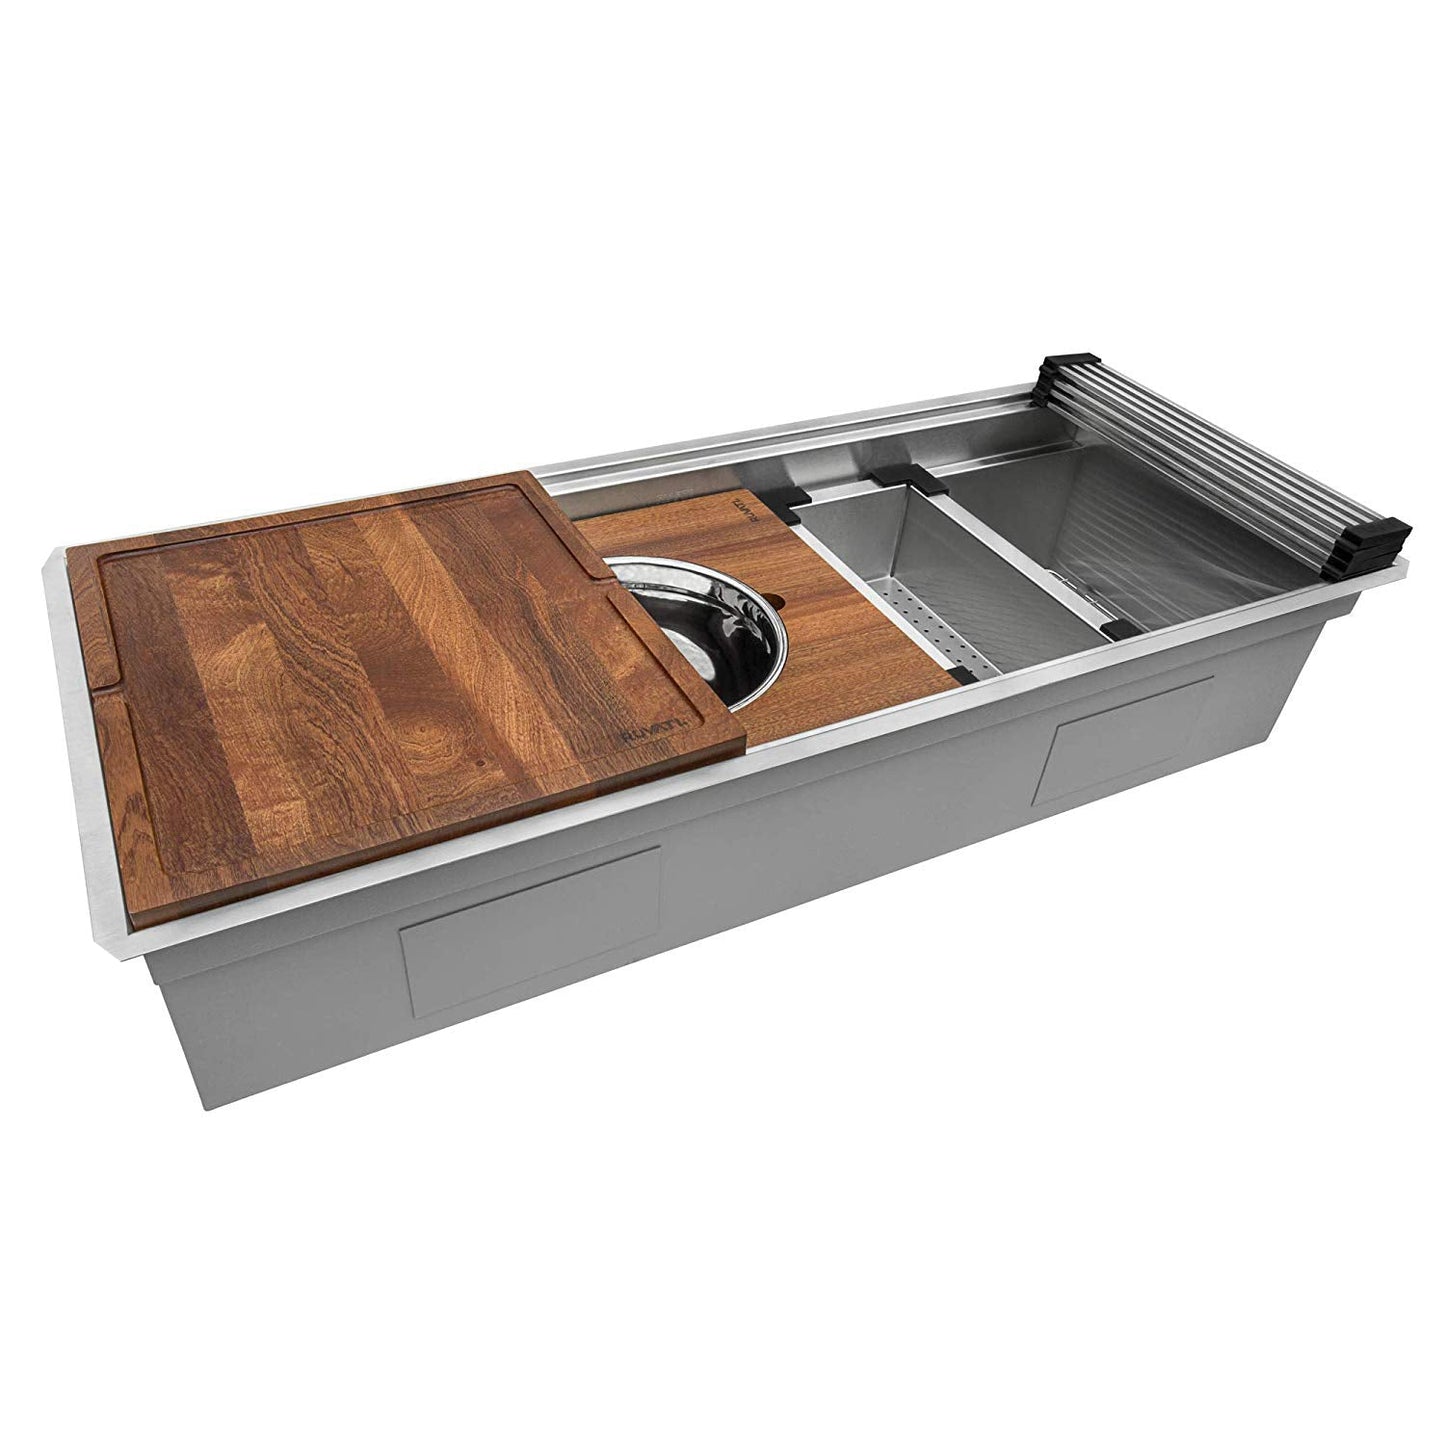 Ruvati Dual Tier 57” x 19" Undermount Stainless Steel Single Bowl Workstation Kitchen Sink With Bottom Rinse Grid and Drain Assembly